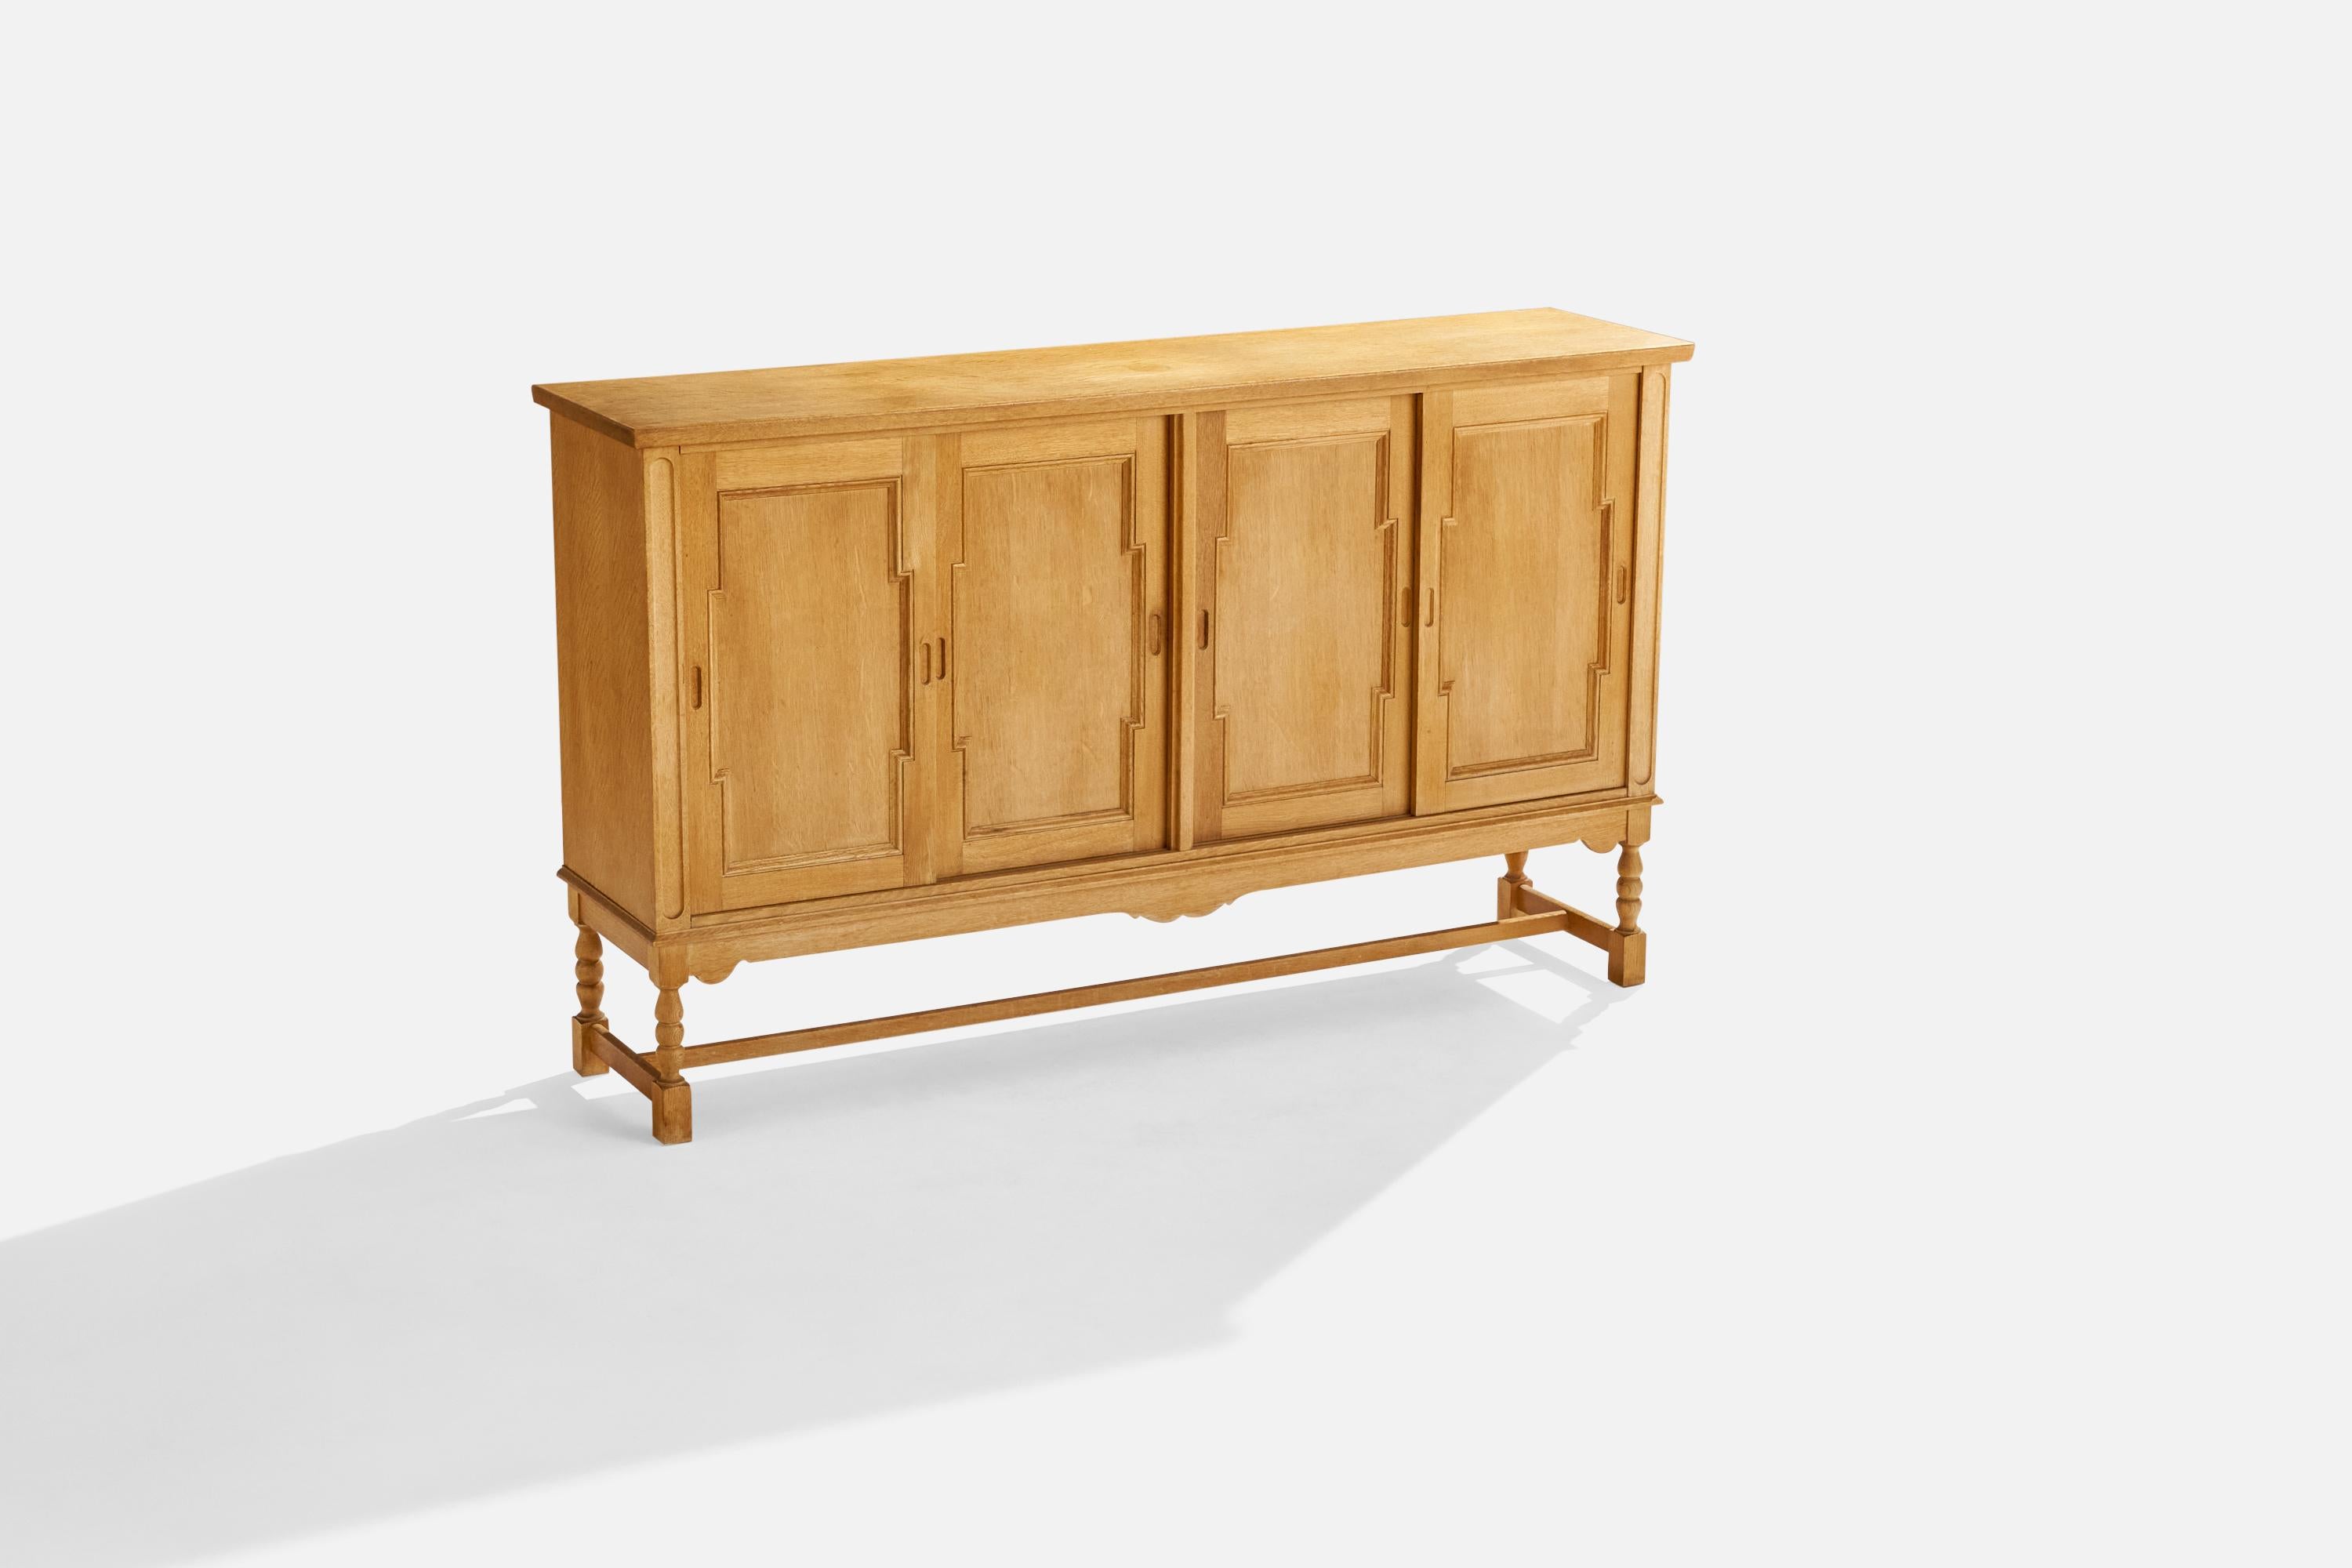 An oak cabinet designed and produced in Denmark, c. 1960s.